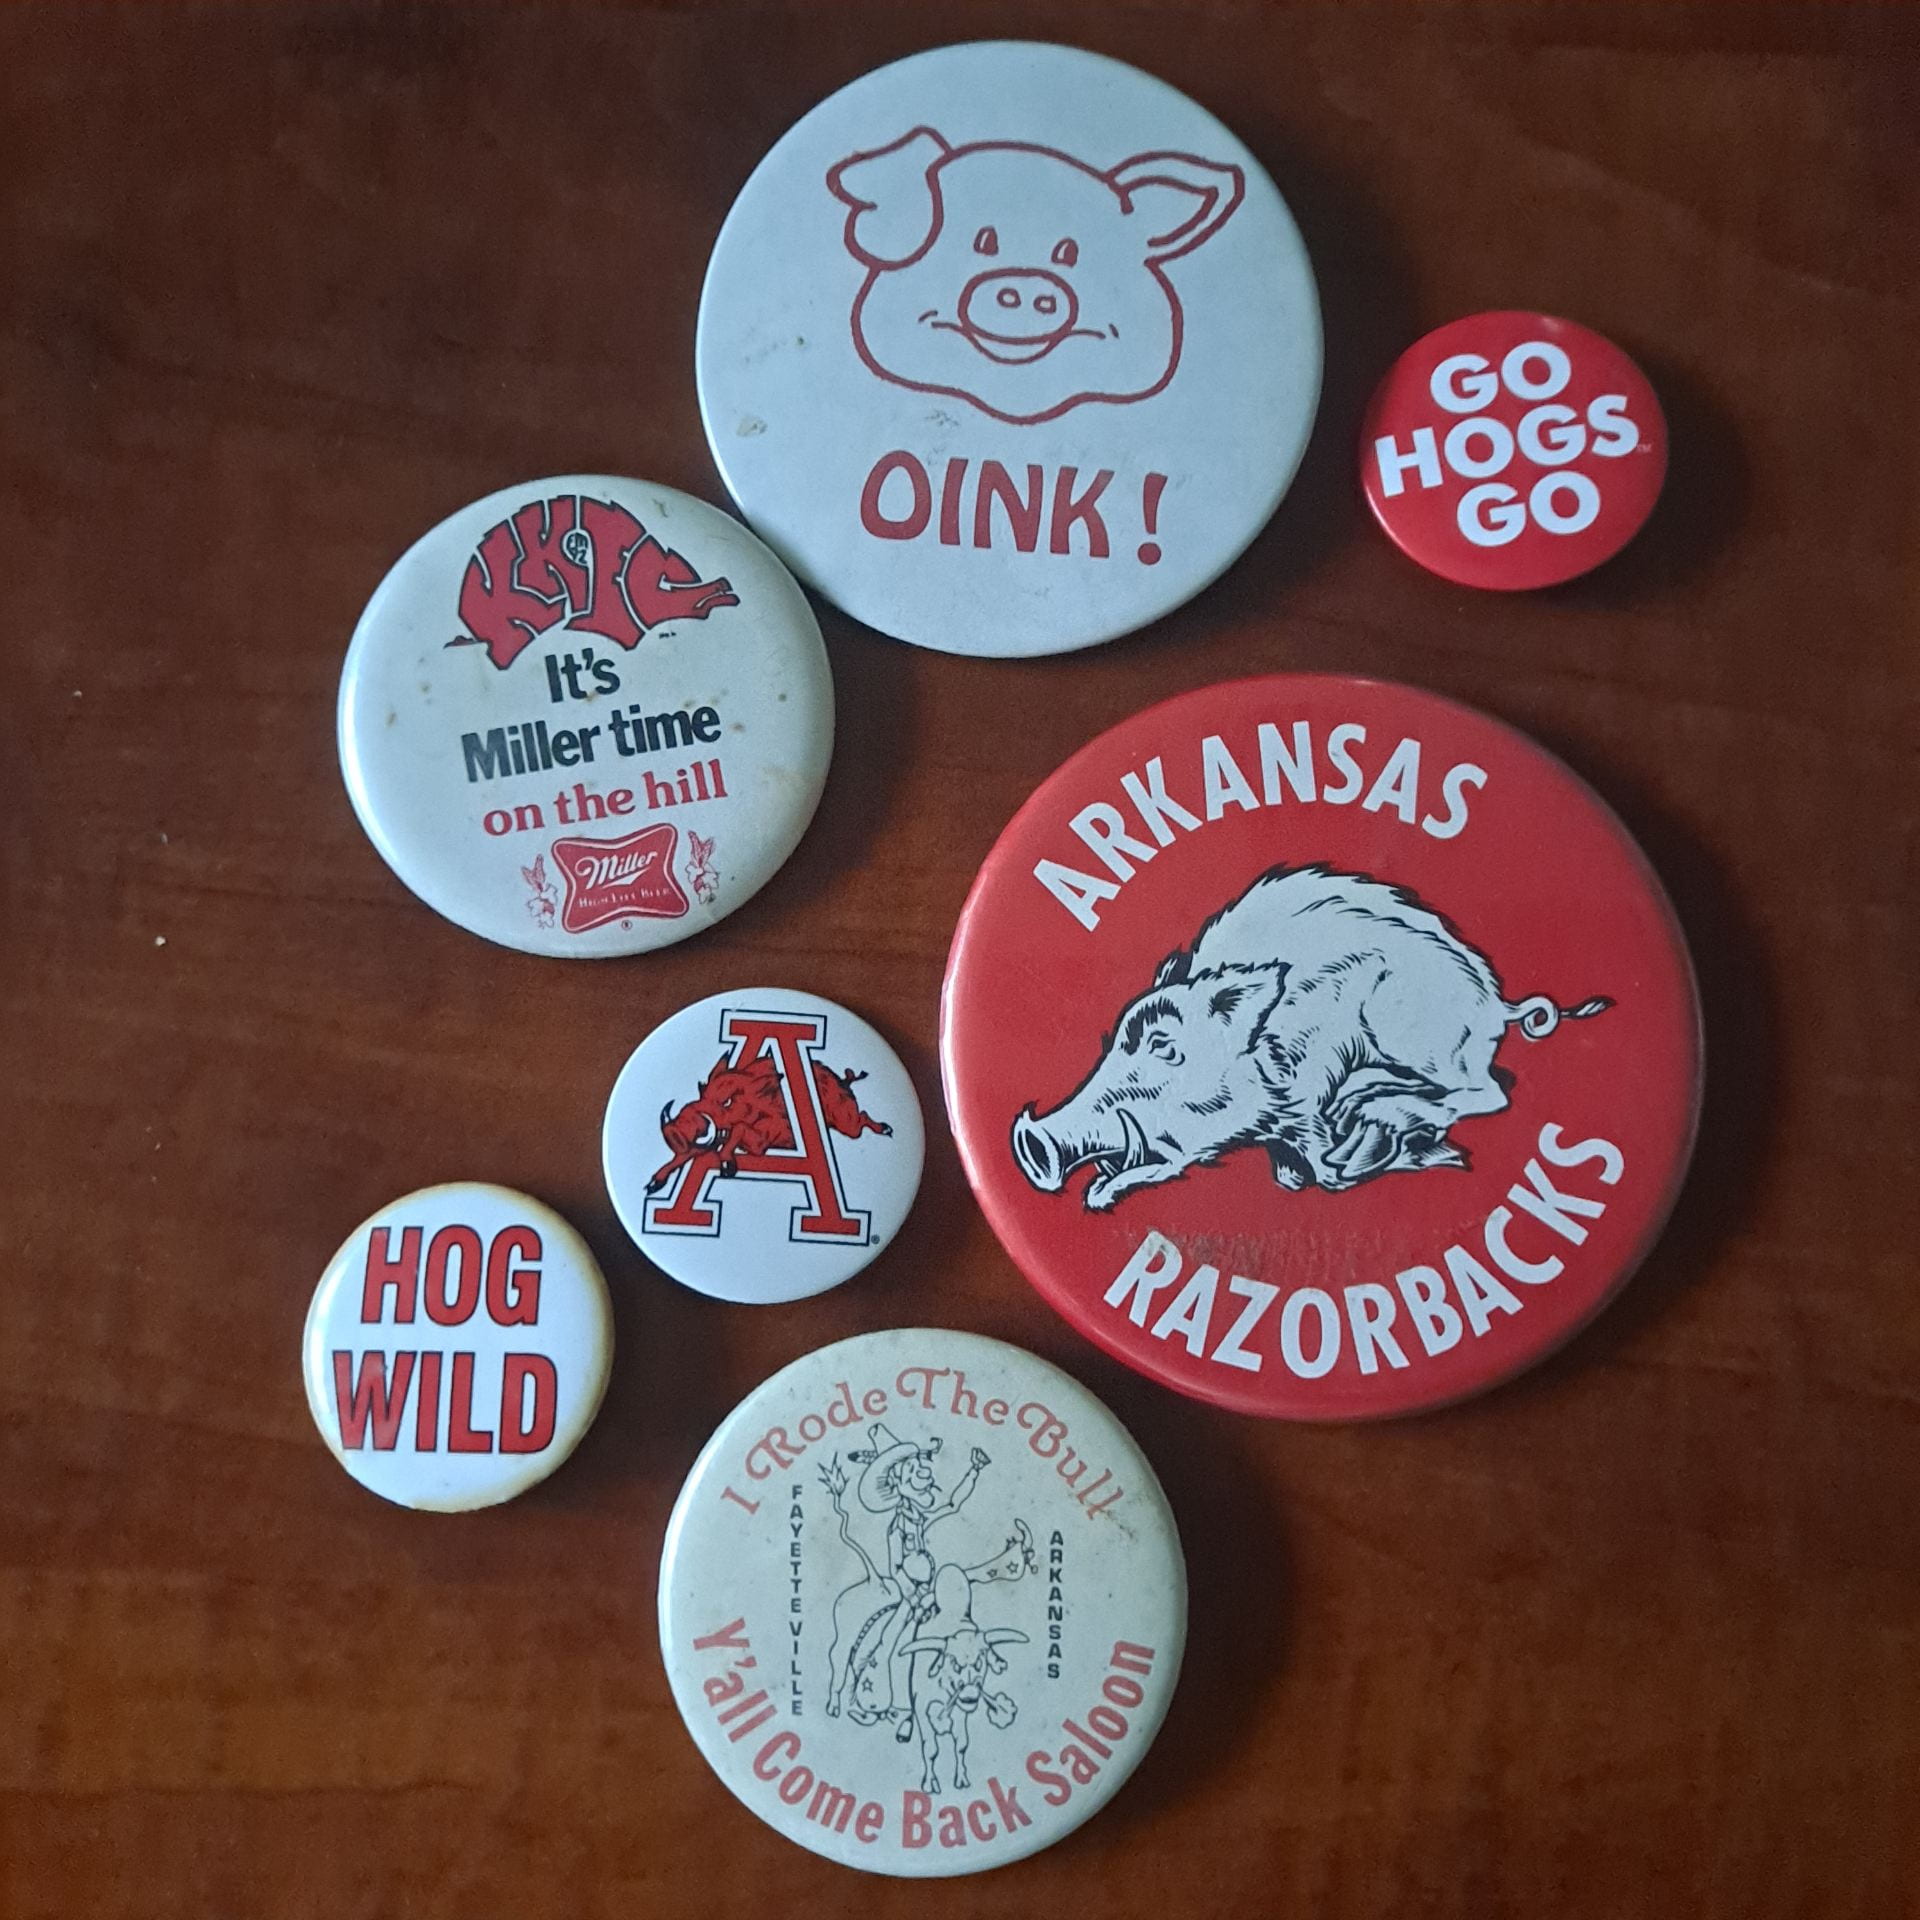 Seven Razorback-themed buttons of various sizes. 1. Small red one that says "Go hogs go". 2. A large red one with a Razorback that says "Arkansas Razorbacks." 3. A large one with a cowboy on a bull that says "I rode the bull, ya'll come back soon, Fayetteville Arkansas" 4. A small white one that says "Hog wild." 5. A small white one with a Razorback running through an A. 6. A large white one with a Razorback that says "It's Miller time on the hill" 7. A large white one with a pig face that says "oink!"